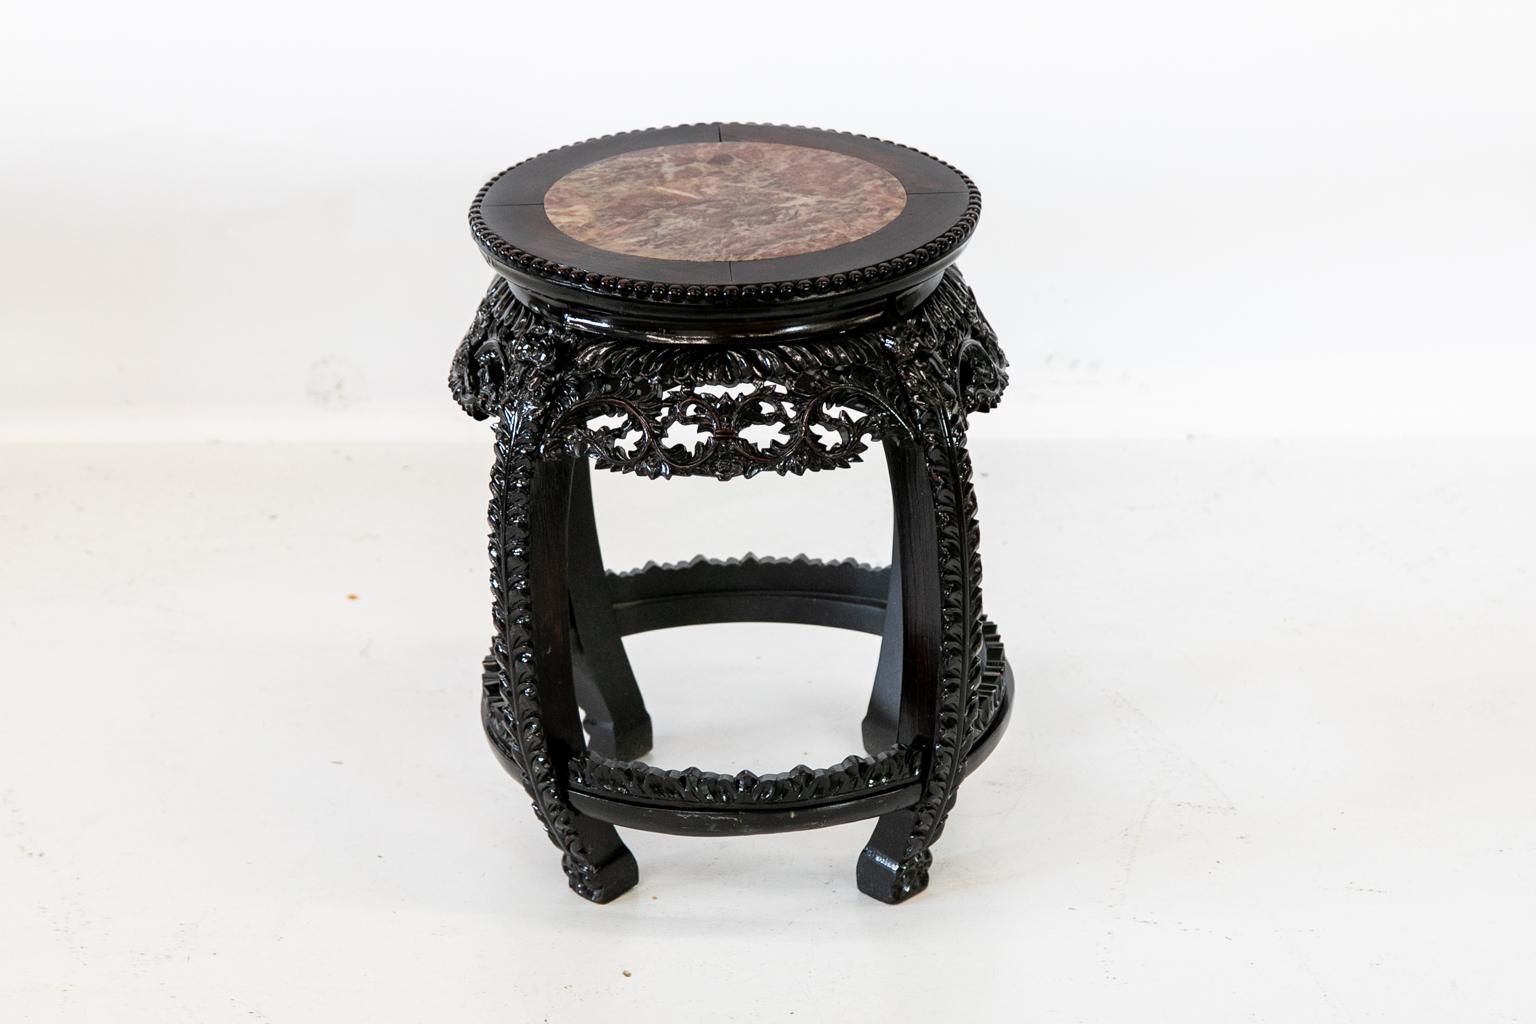 Chinese rosewood carved stand is carved with leaves and has a beaded edge around the top. The arched legs are carved, and the marble center is original.